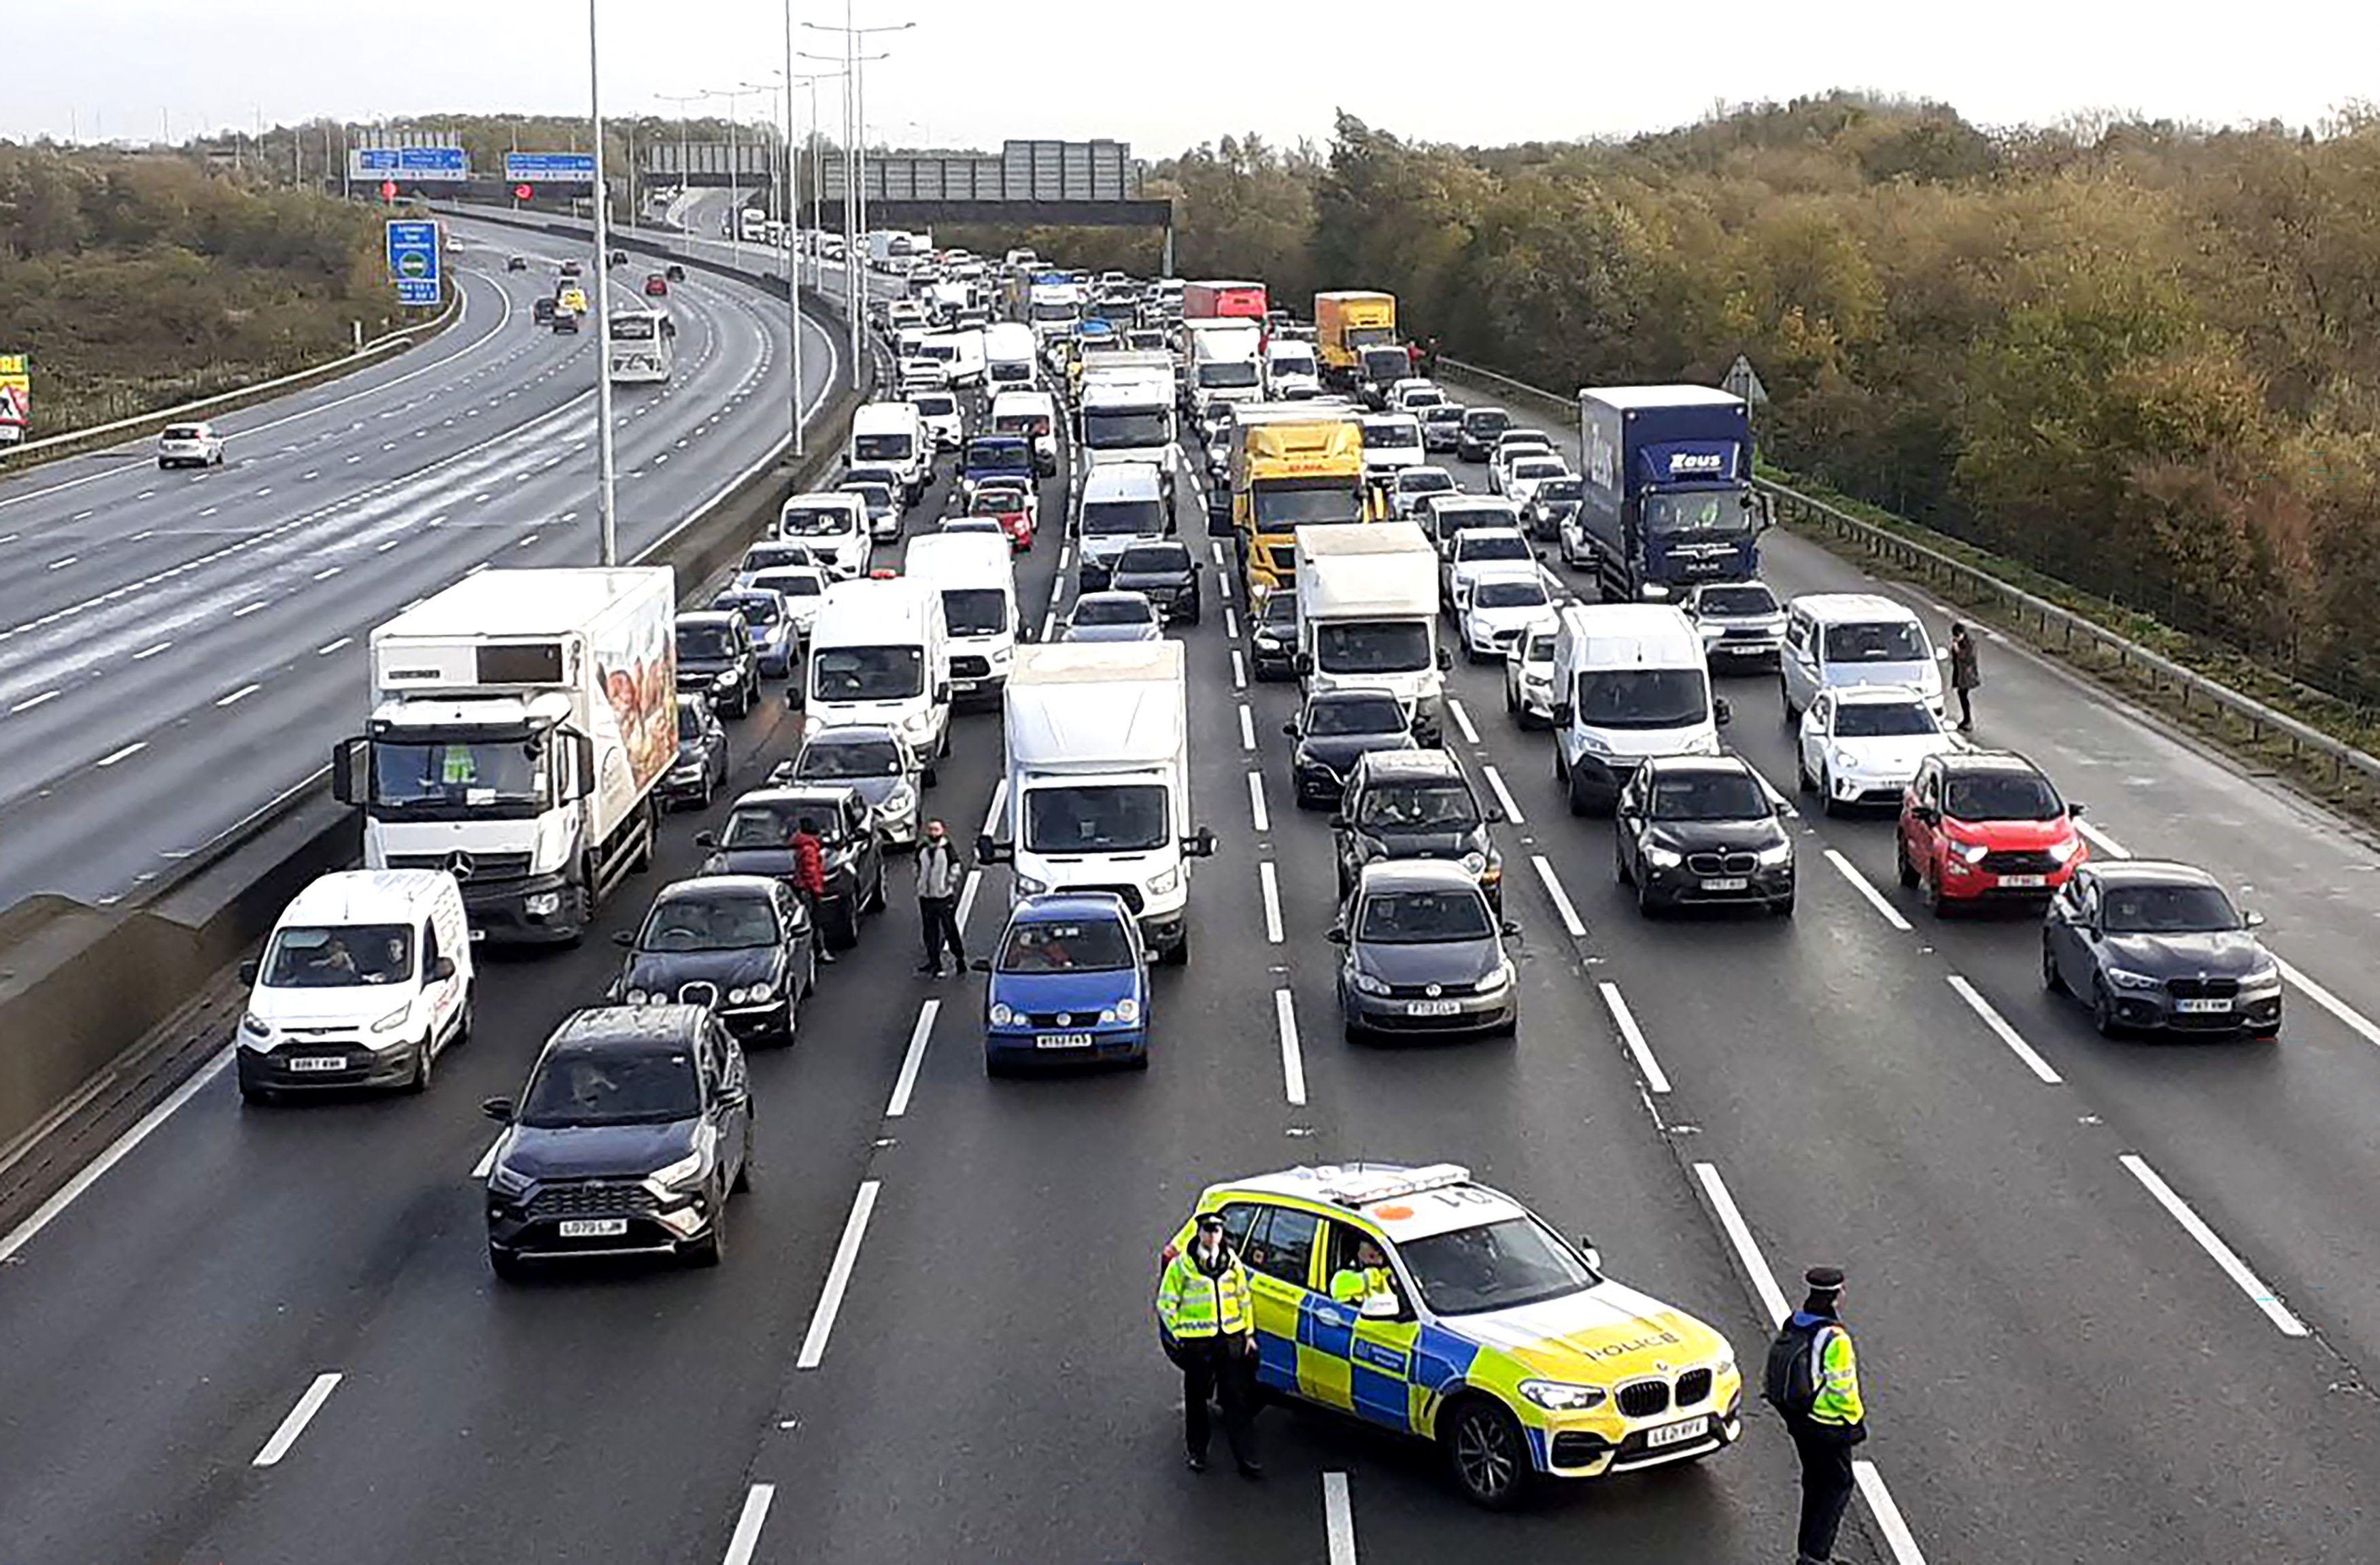 Just Stop Oil protesters jailed after M25 blocked